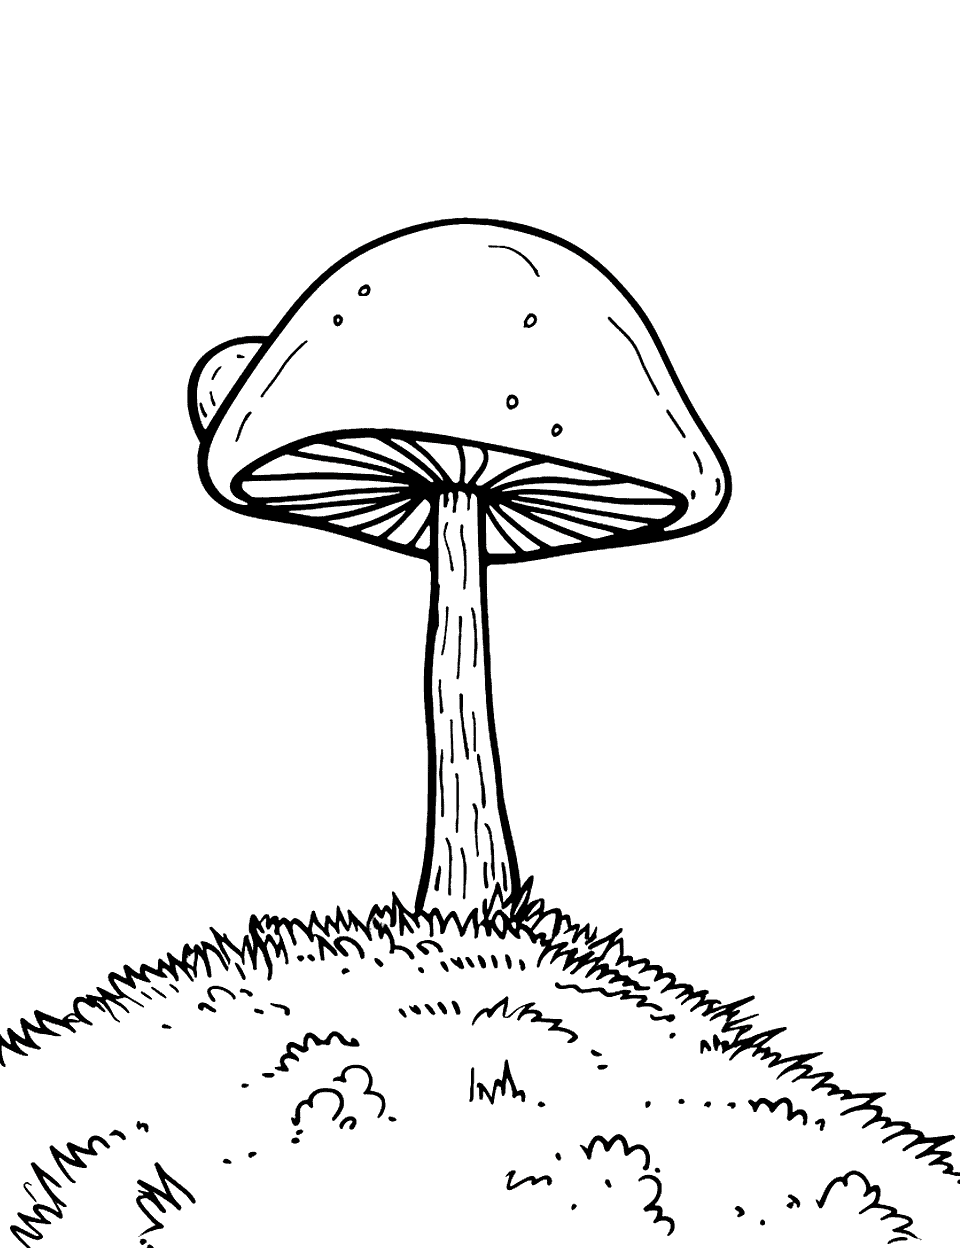 Lone Mushroom on a Hill Coloring Page - A single mushroom stands on a small hill under a clear sky.